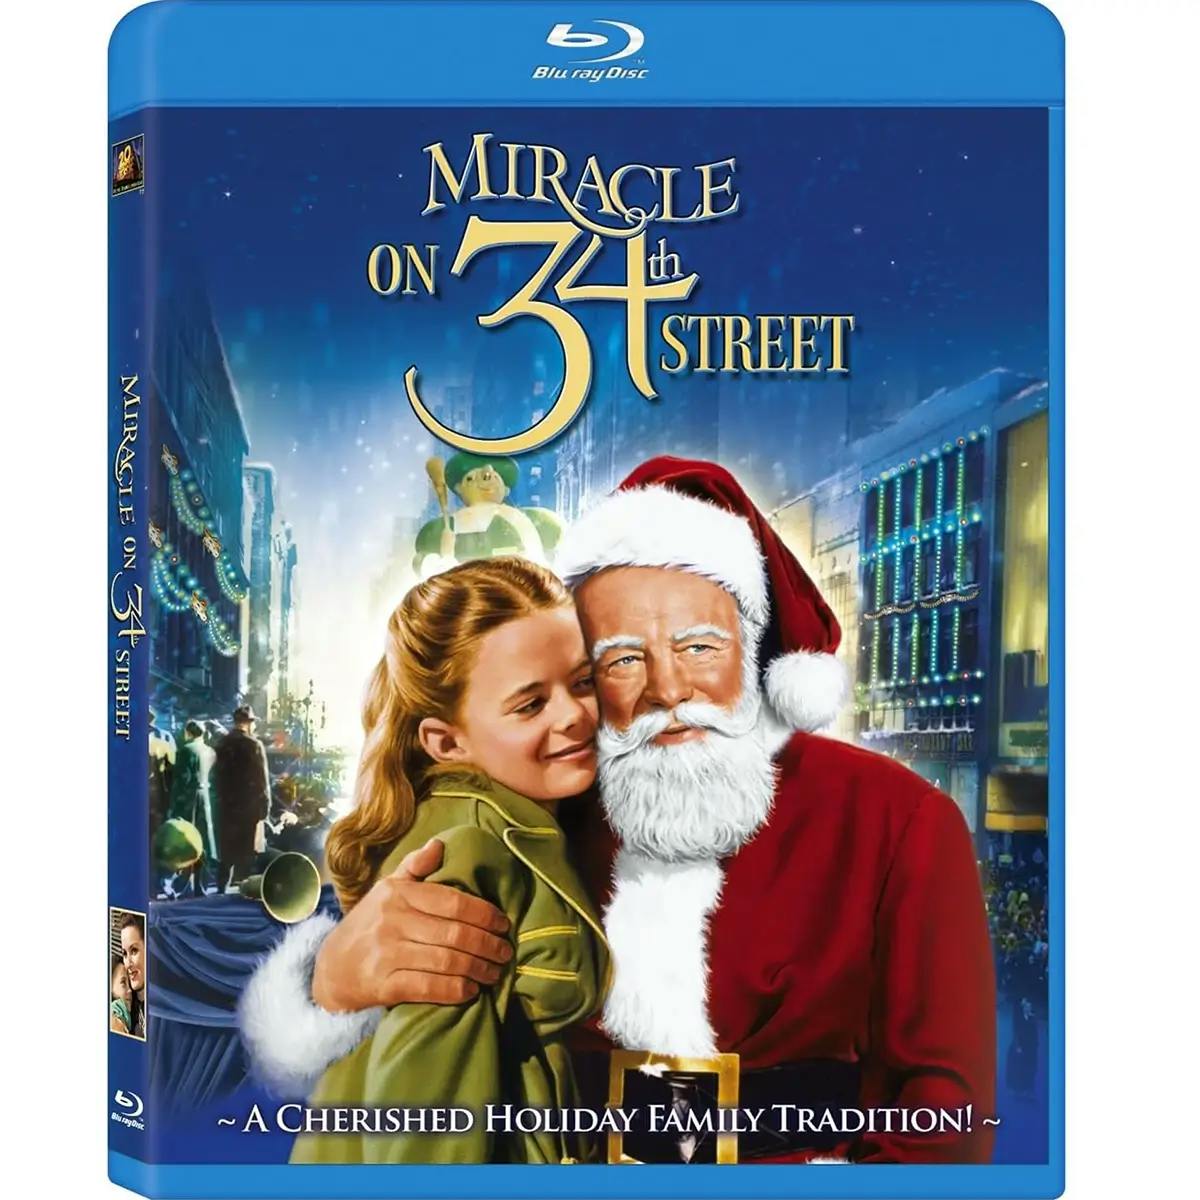 Blu-ray version of the classic Christmas movie “Miracle on 34th Street.”